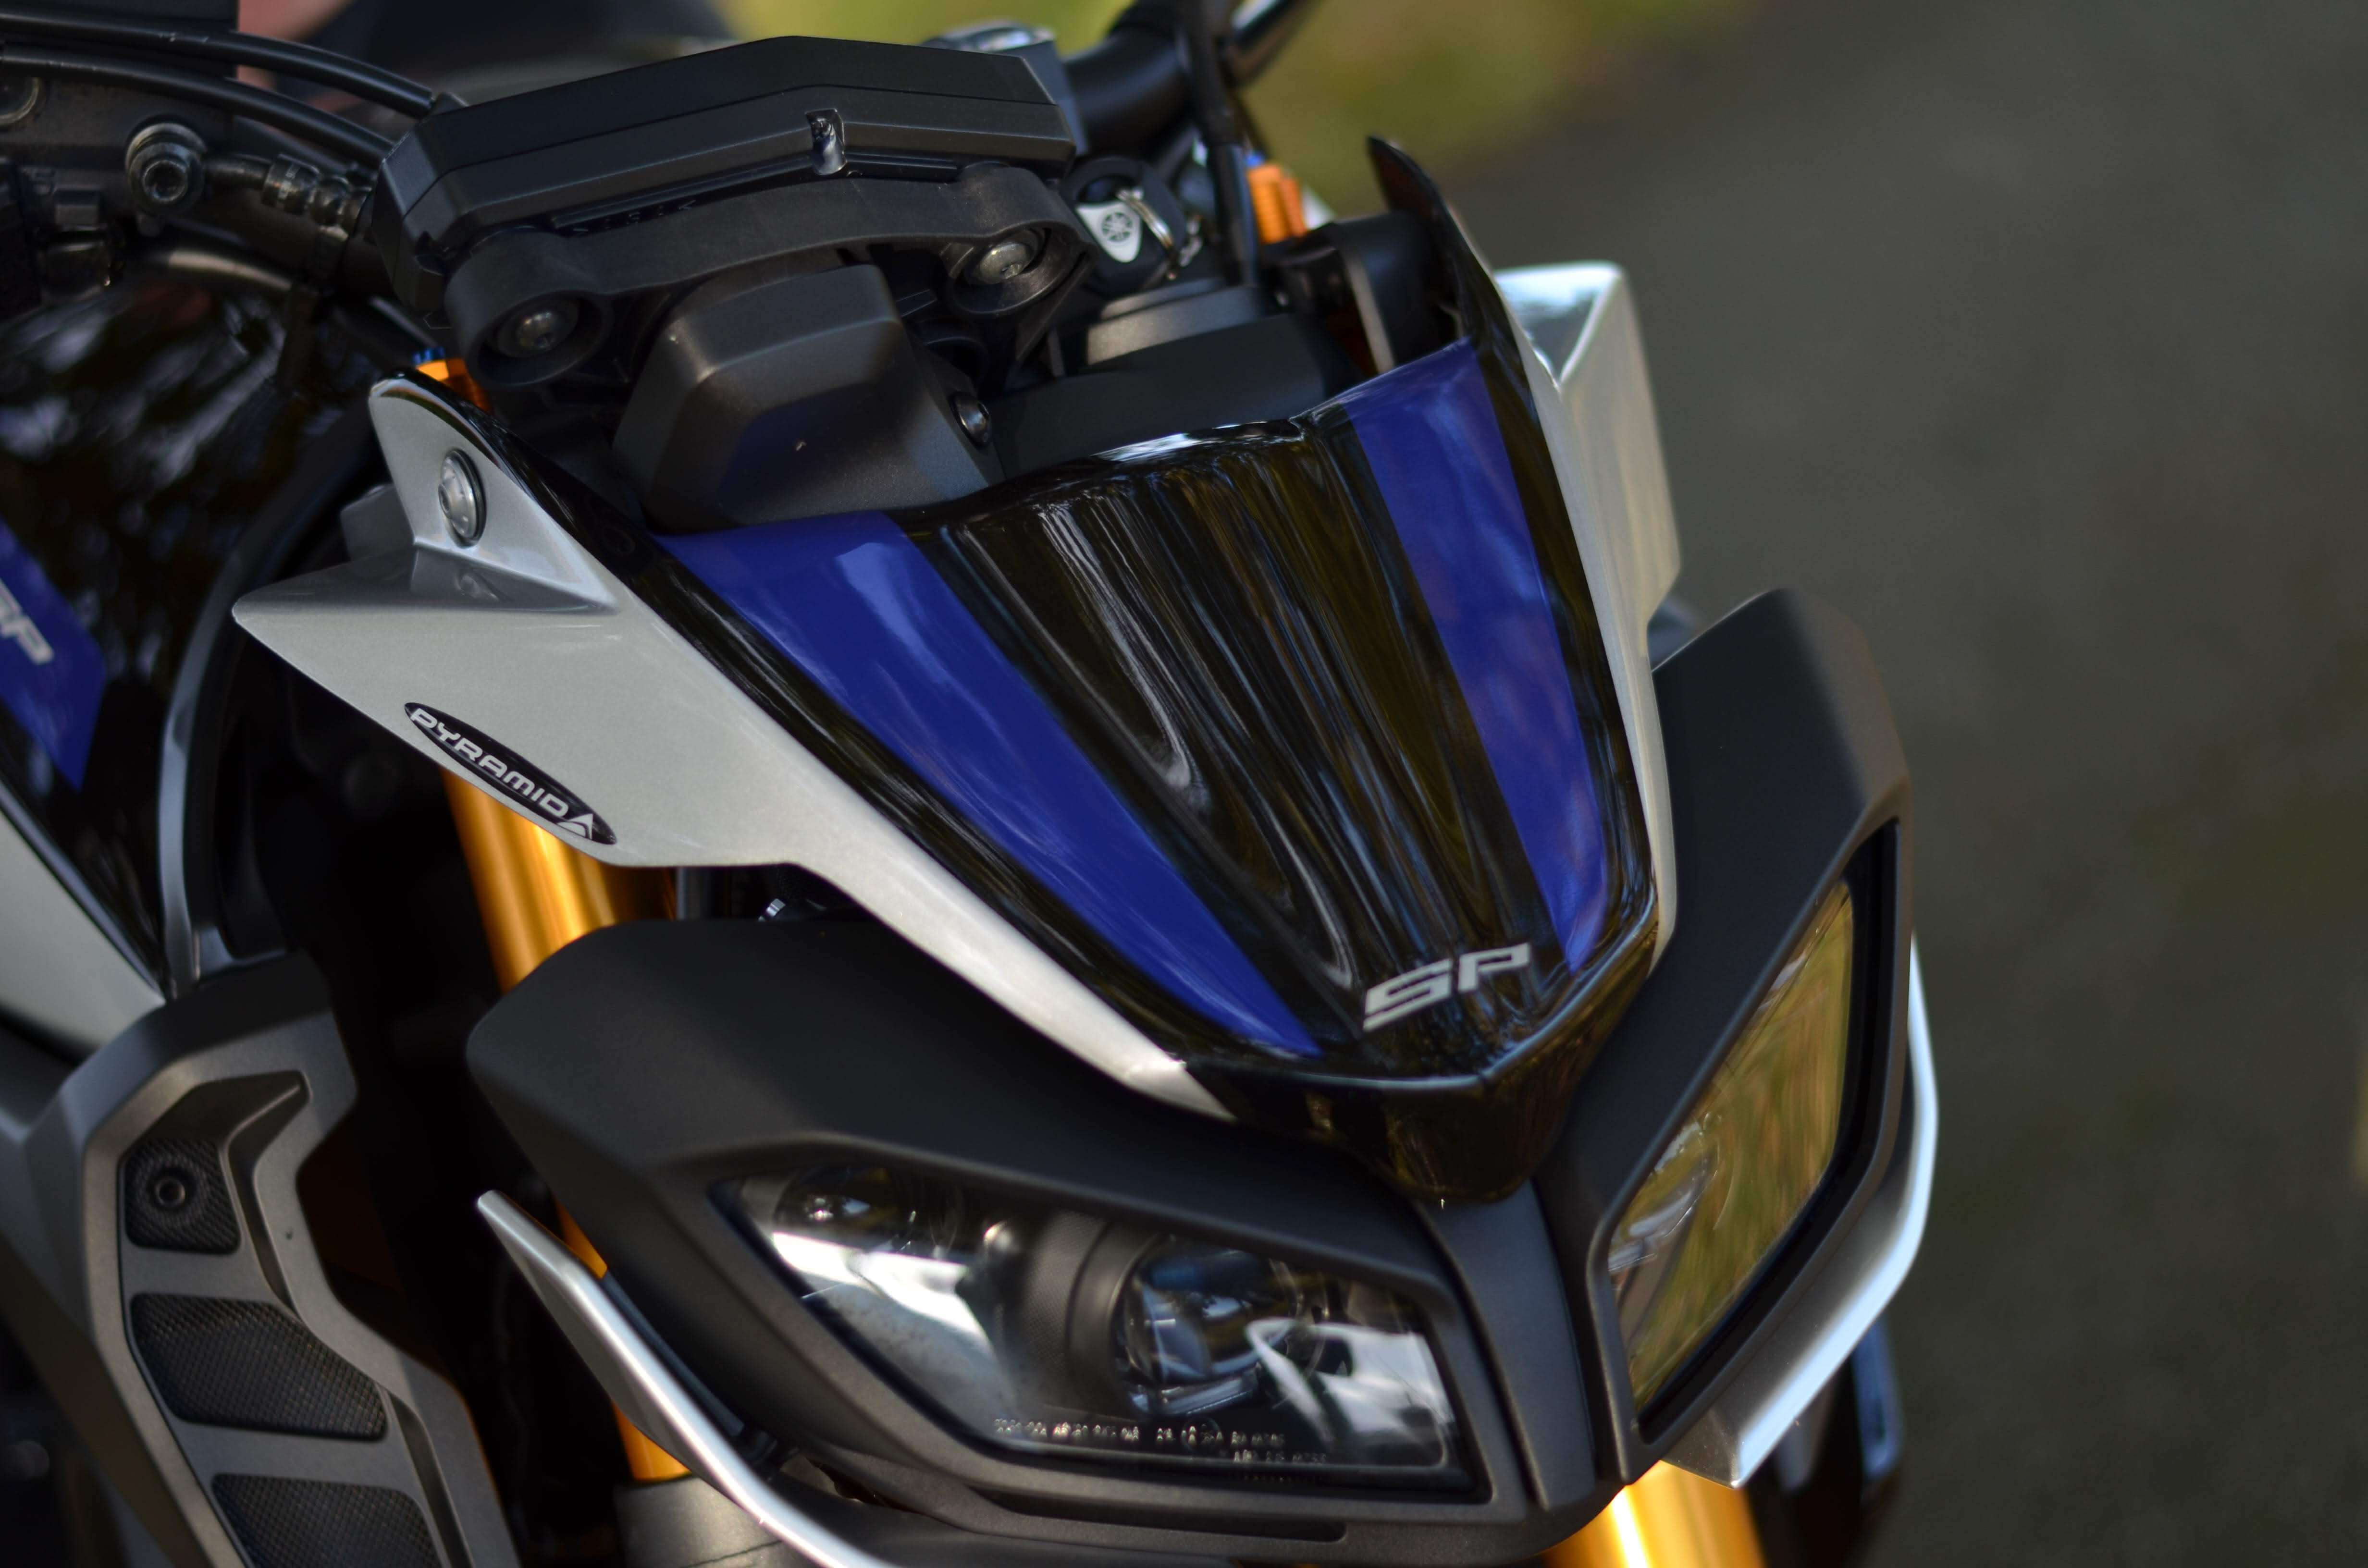 Pyramid Motorcycle Accessories: An In-Depth Guide